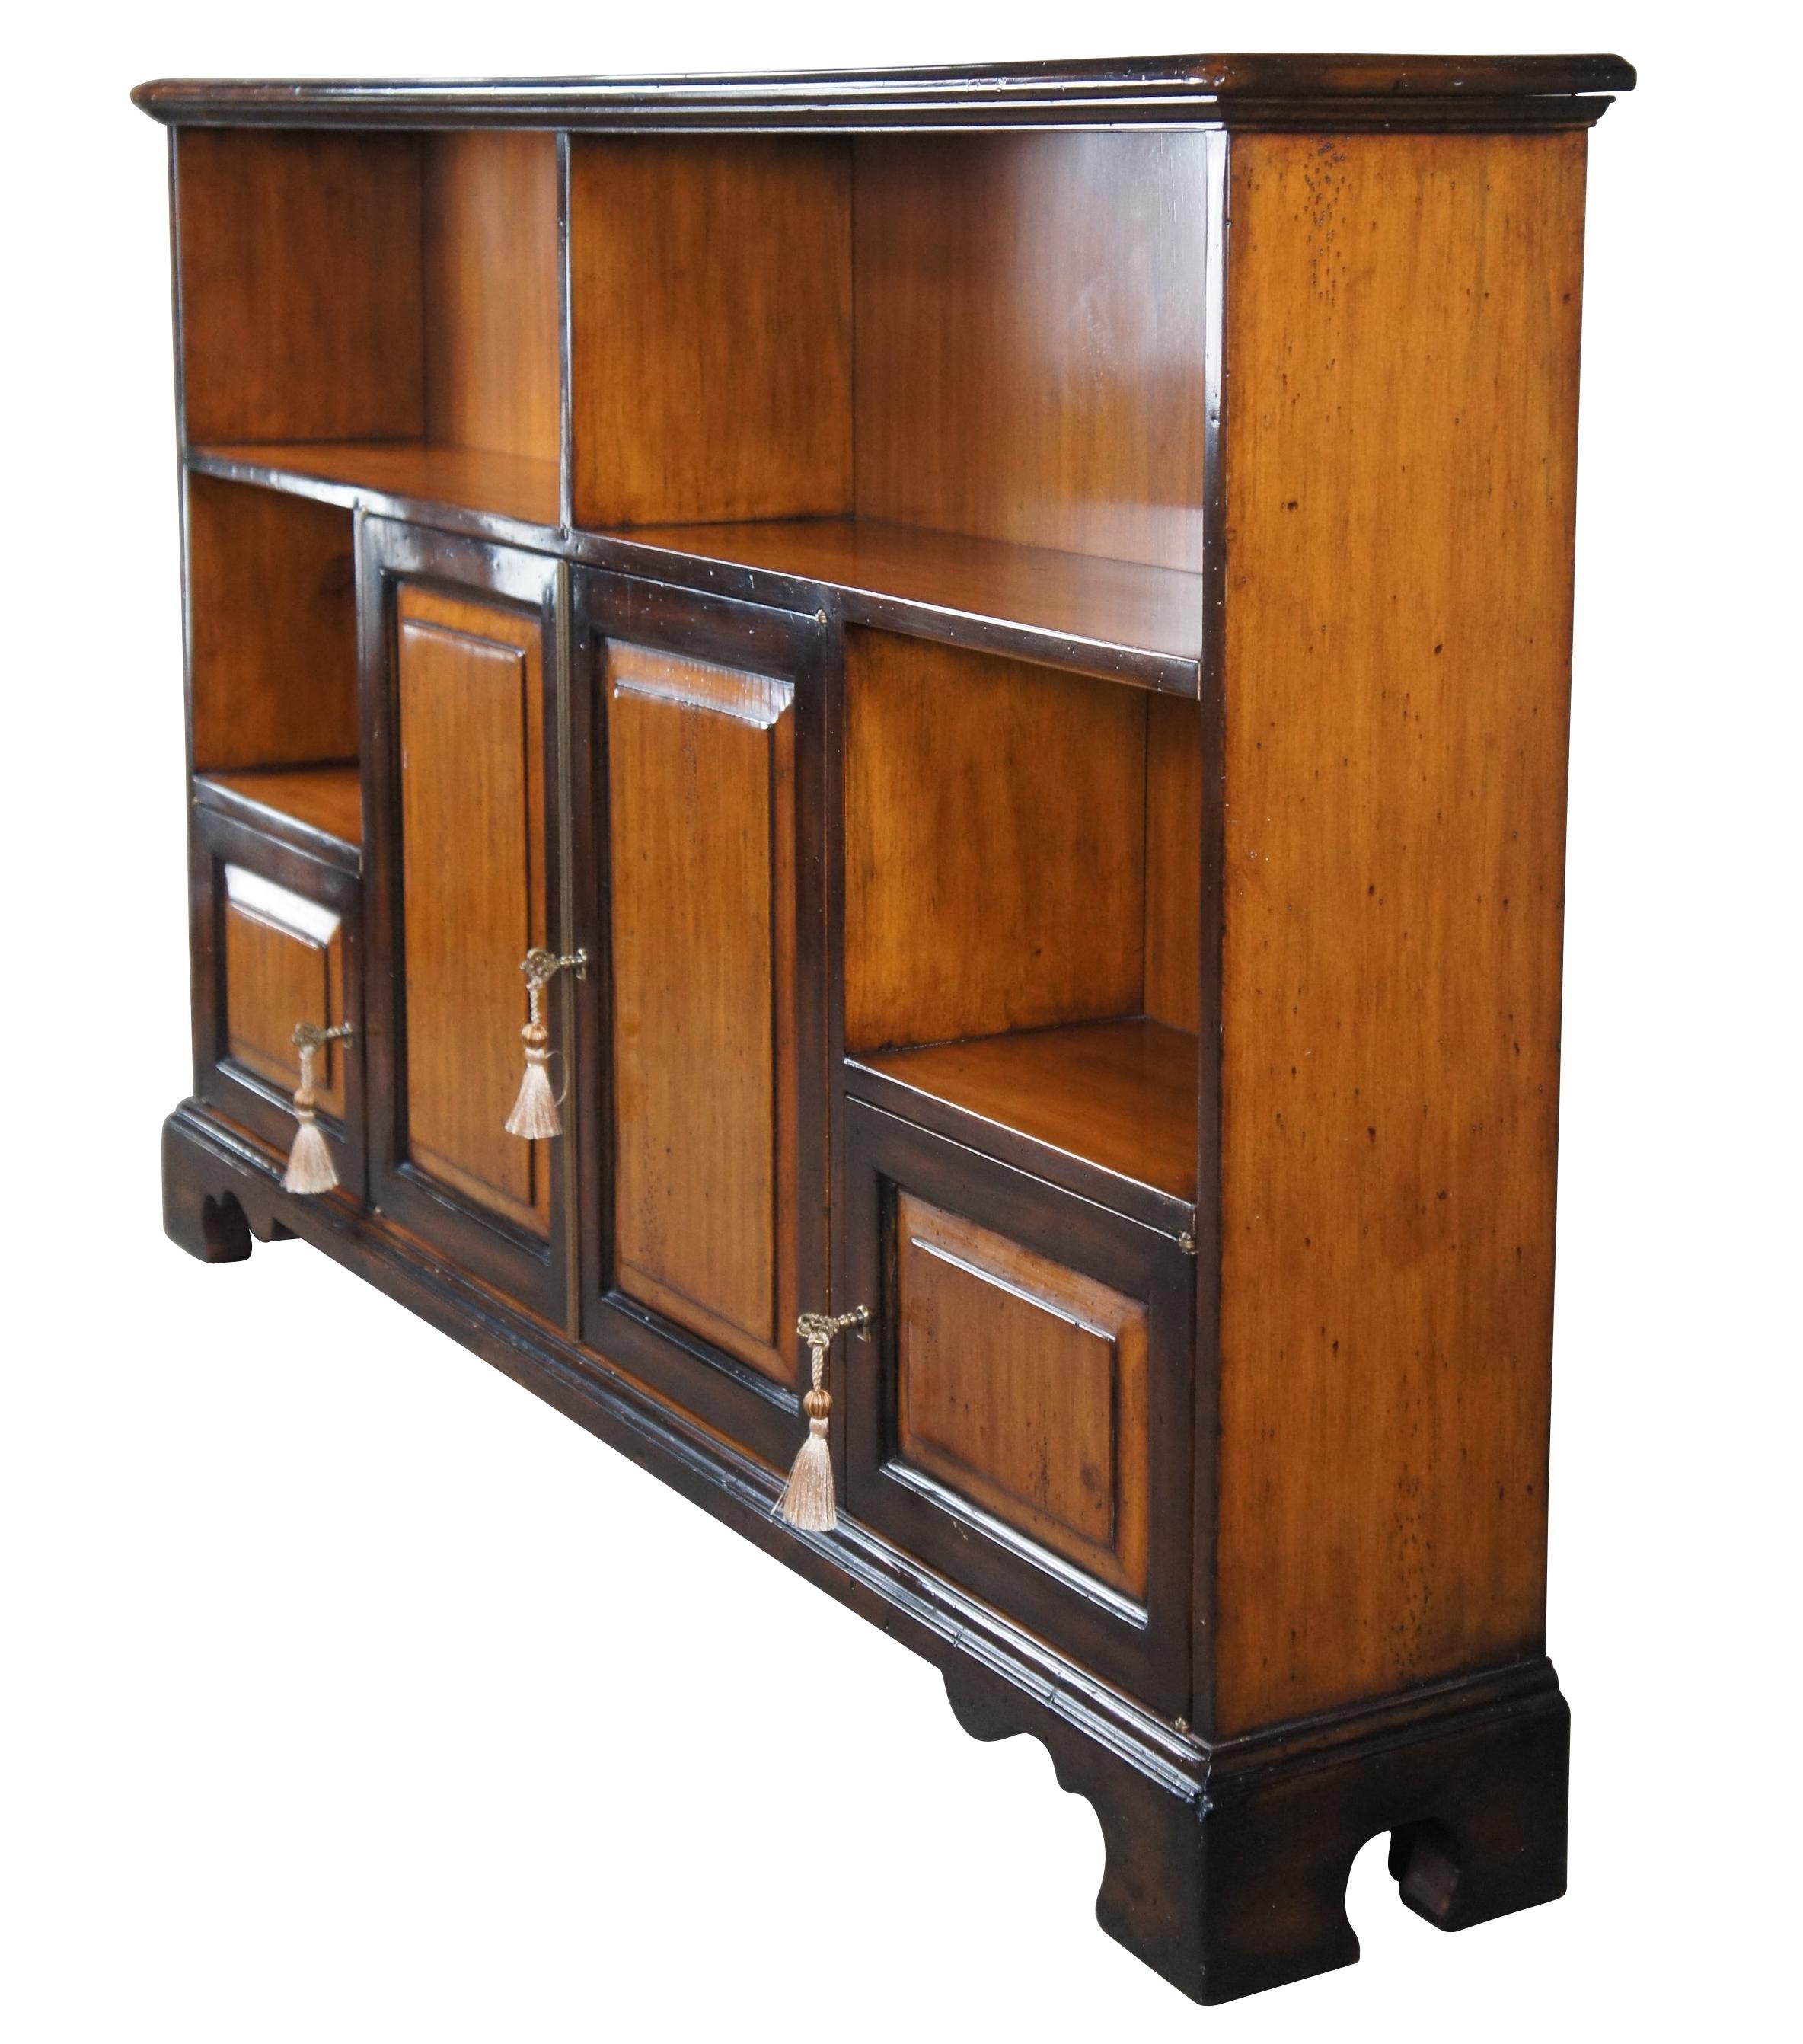 Vintage Theodore Alexander Chateau du Vallois petite console or book shelf cabinet, circa last quarter 20th century. Made of mahogany with a two tone French Provincial styling. Features a slender rectangular frame with cubbies for books or